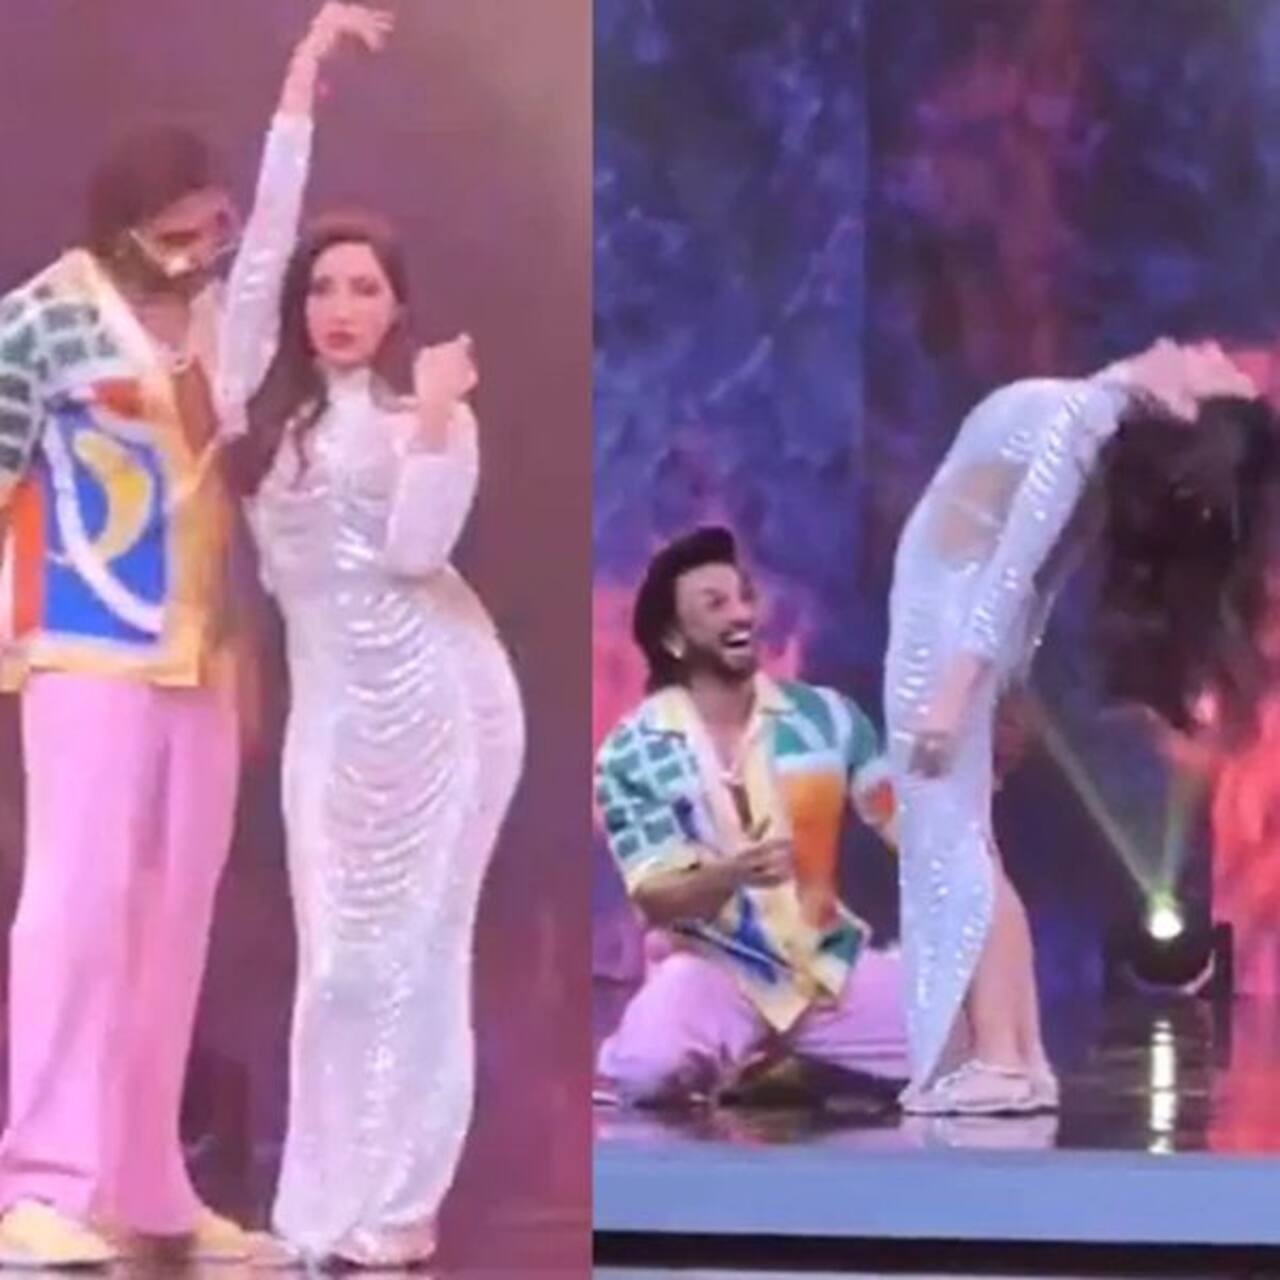 Ranveer Singh and Nora Fatehi burn the dance floor with their killer moves on Garmi song [Watch Video]